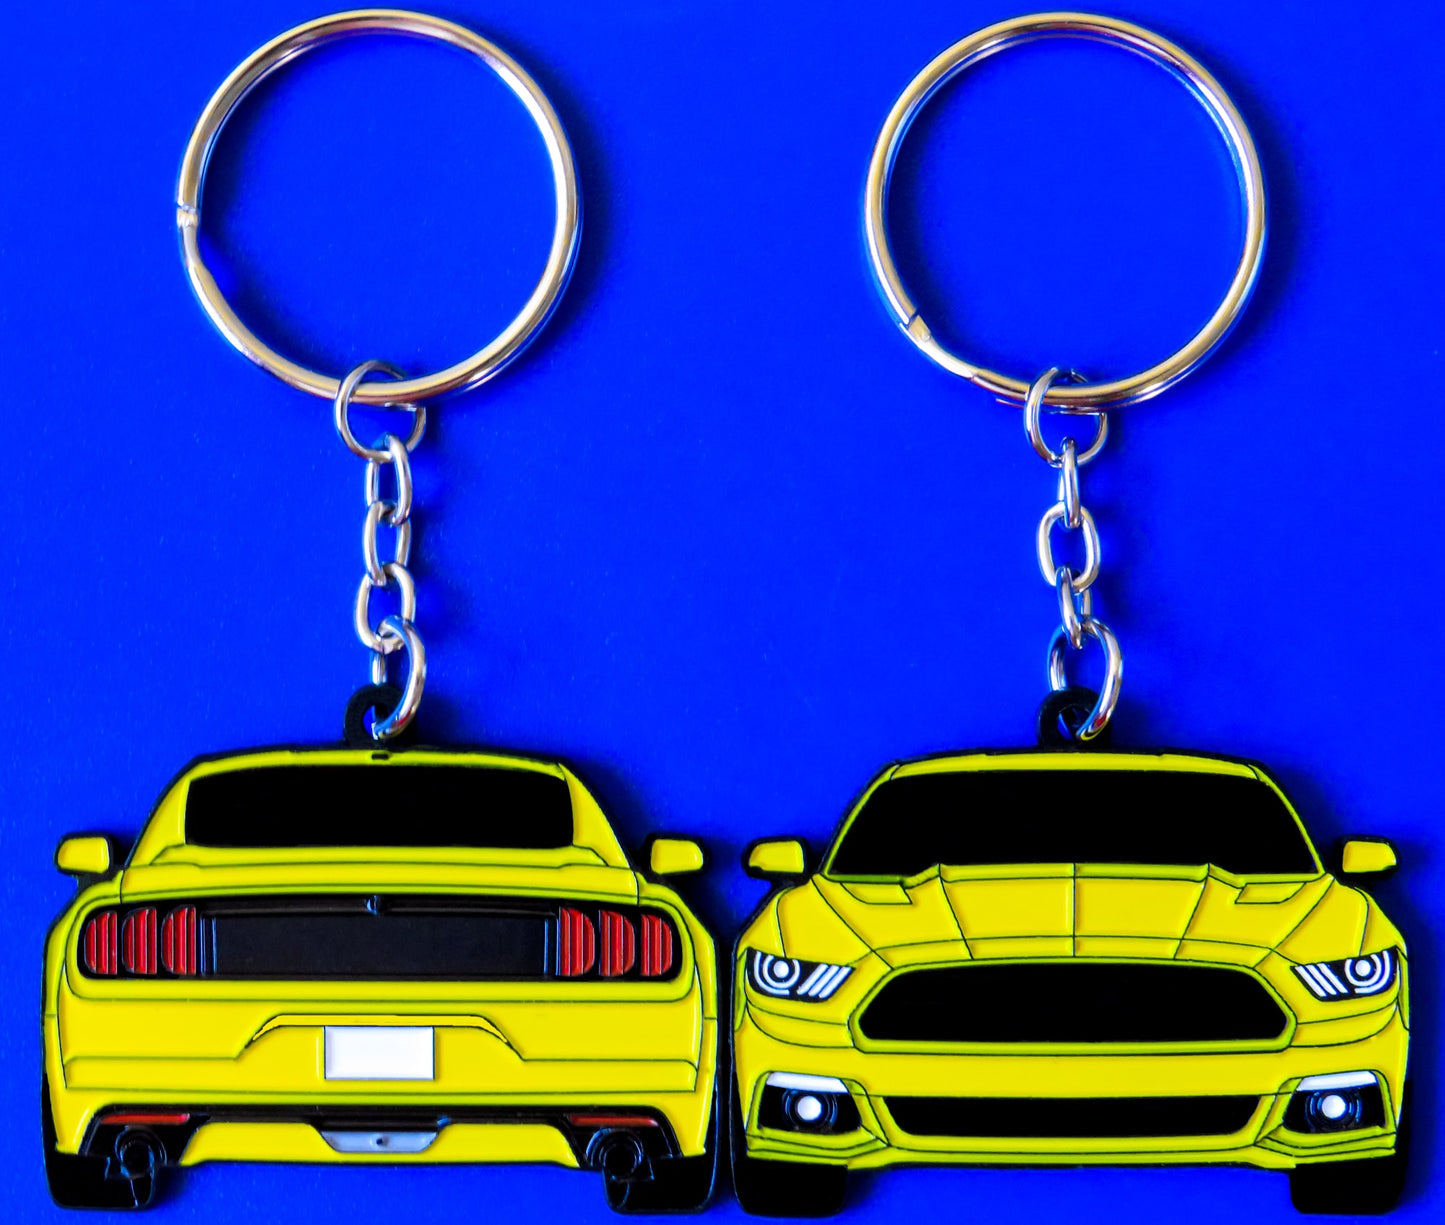 Keychain that fits on a key fob cover for Ford Mustang Yellow sixth generation S550 Stang lanyard for car guys and enthusiasts, girlfriend, boyfriend, father, dad, mother, mom, him, her, and more. Apparel and parts 2015 2016 2017 2018 2019 2020 2021 2022 Eco boost turbo cyclone 5.0 2.3